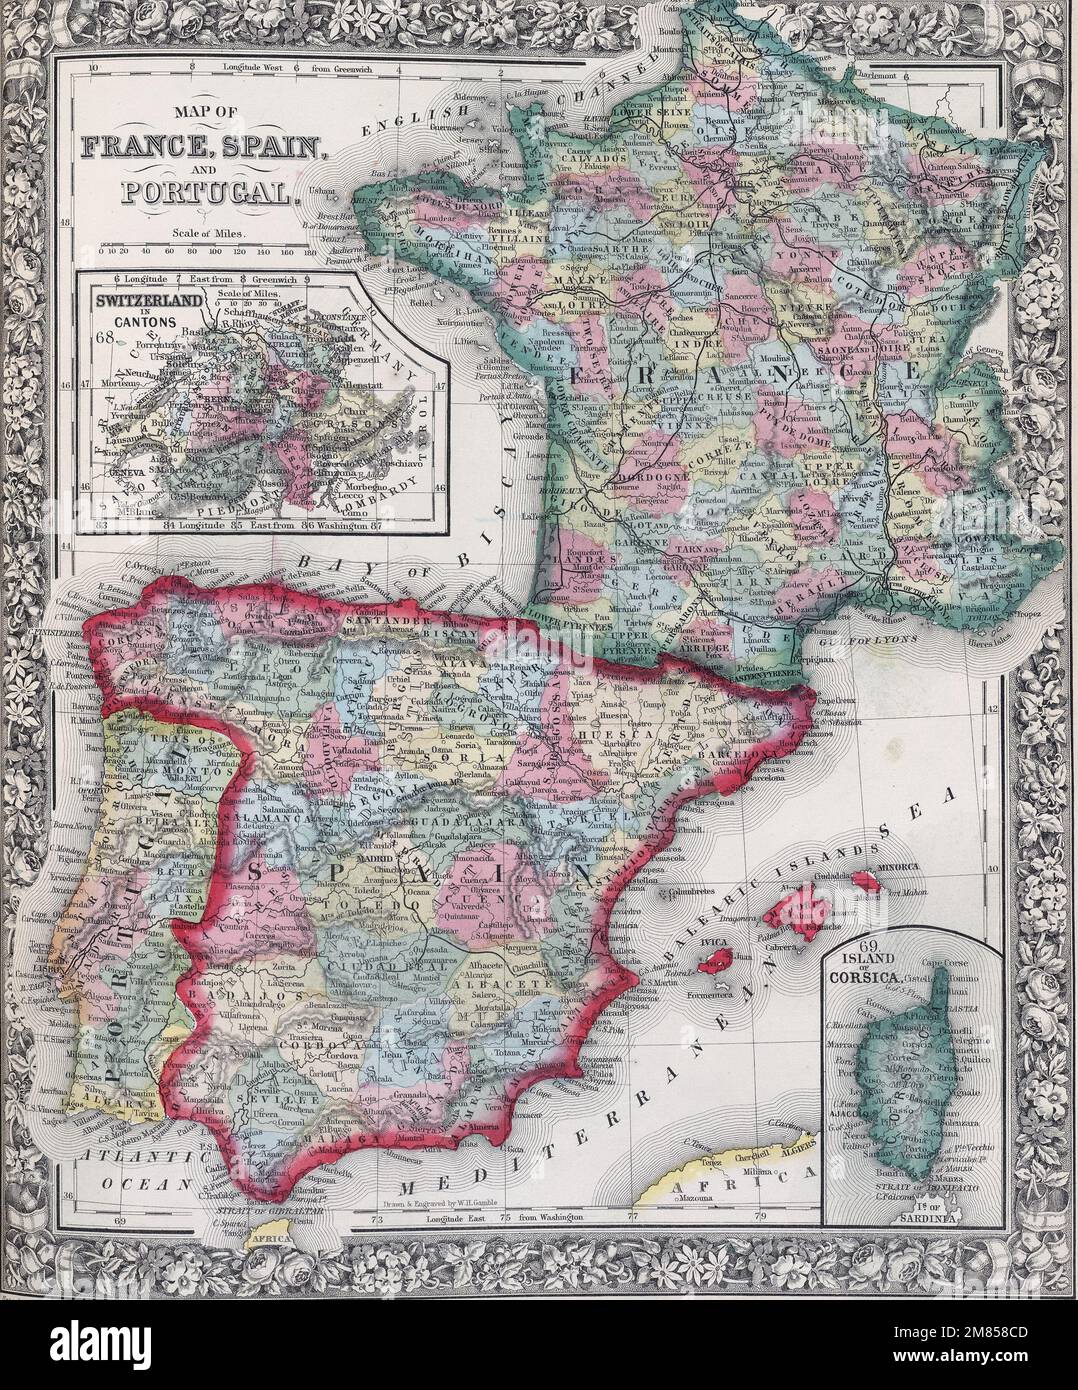 Antique map of Spain, France and Portugal from 19 century atlas Modified from map released under Creative Commons license from New York Public Library Stock Photo